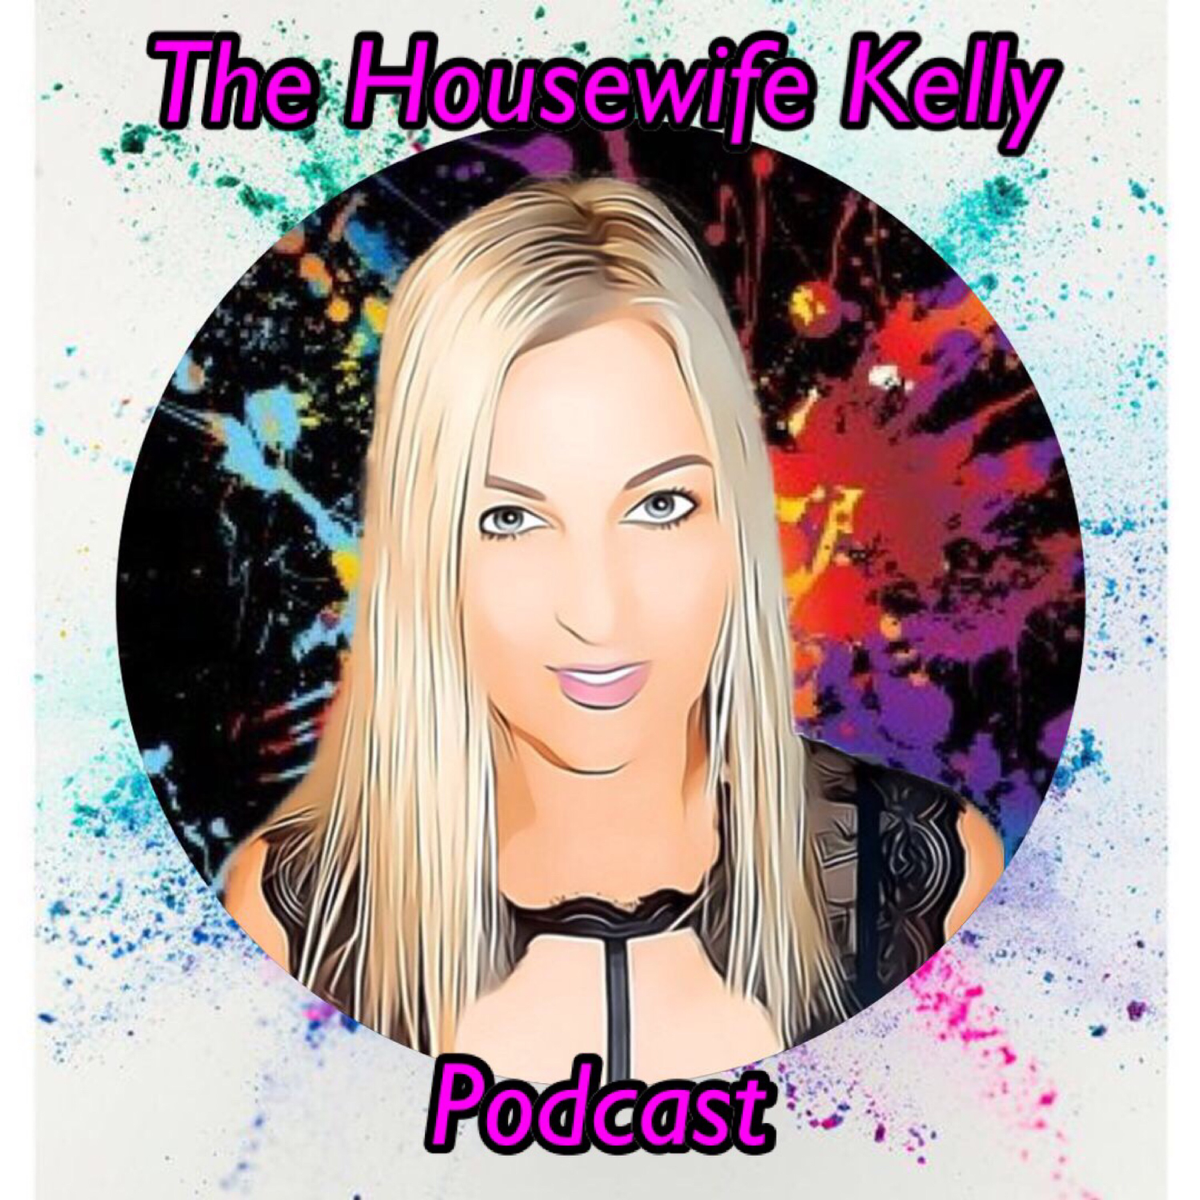 The Housewife Kelly Podcast Podyssey photo